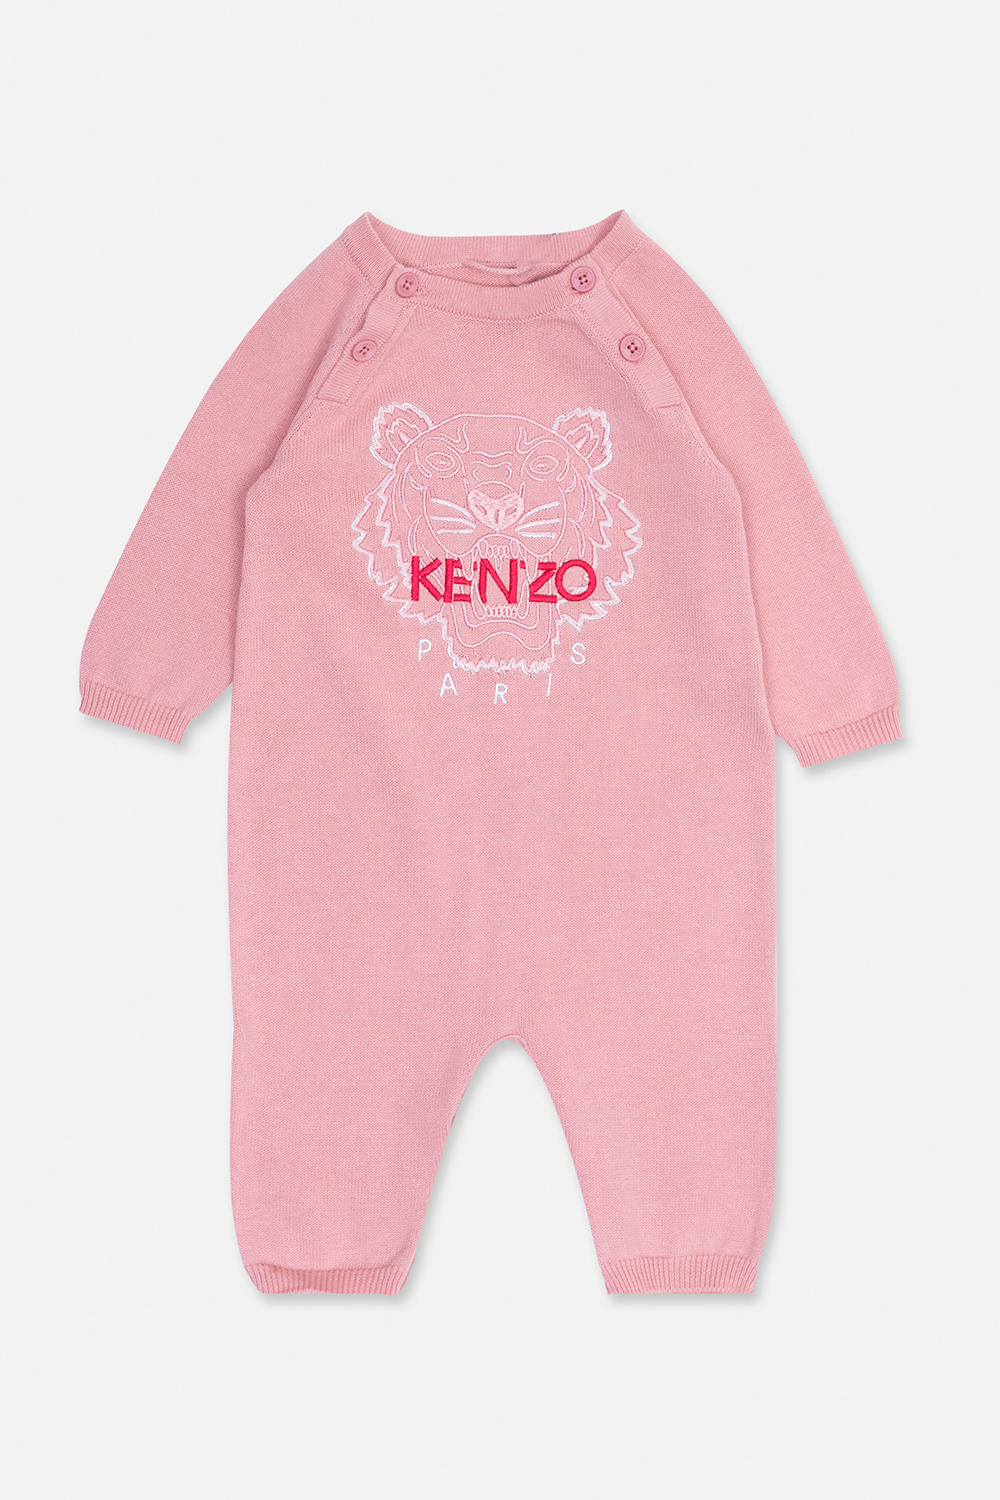 Kenzo Kids for the perfect gift that will delight everyone